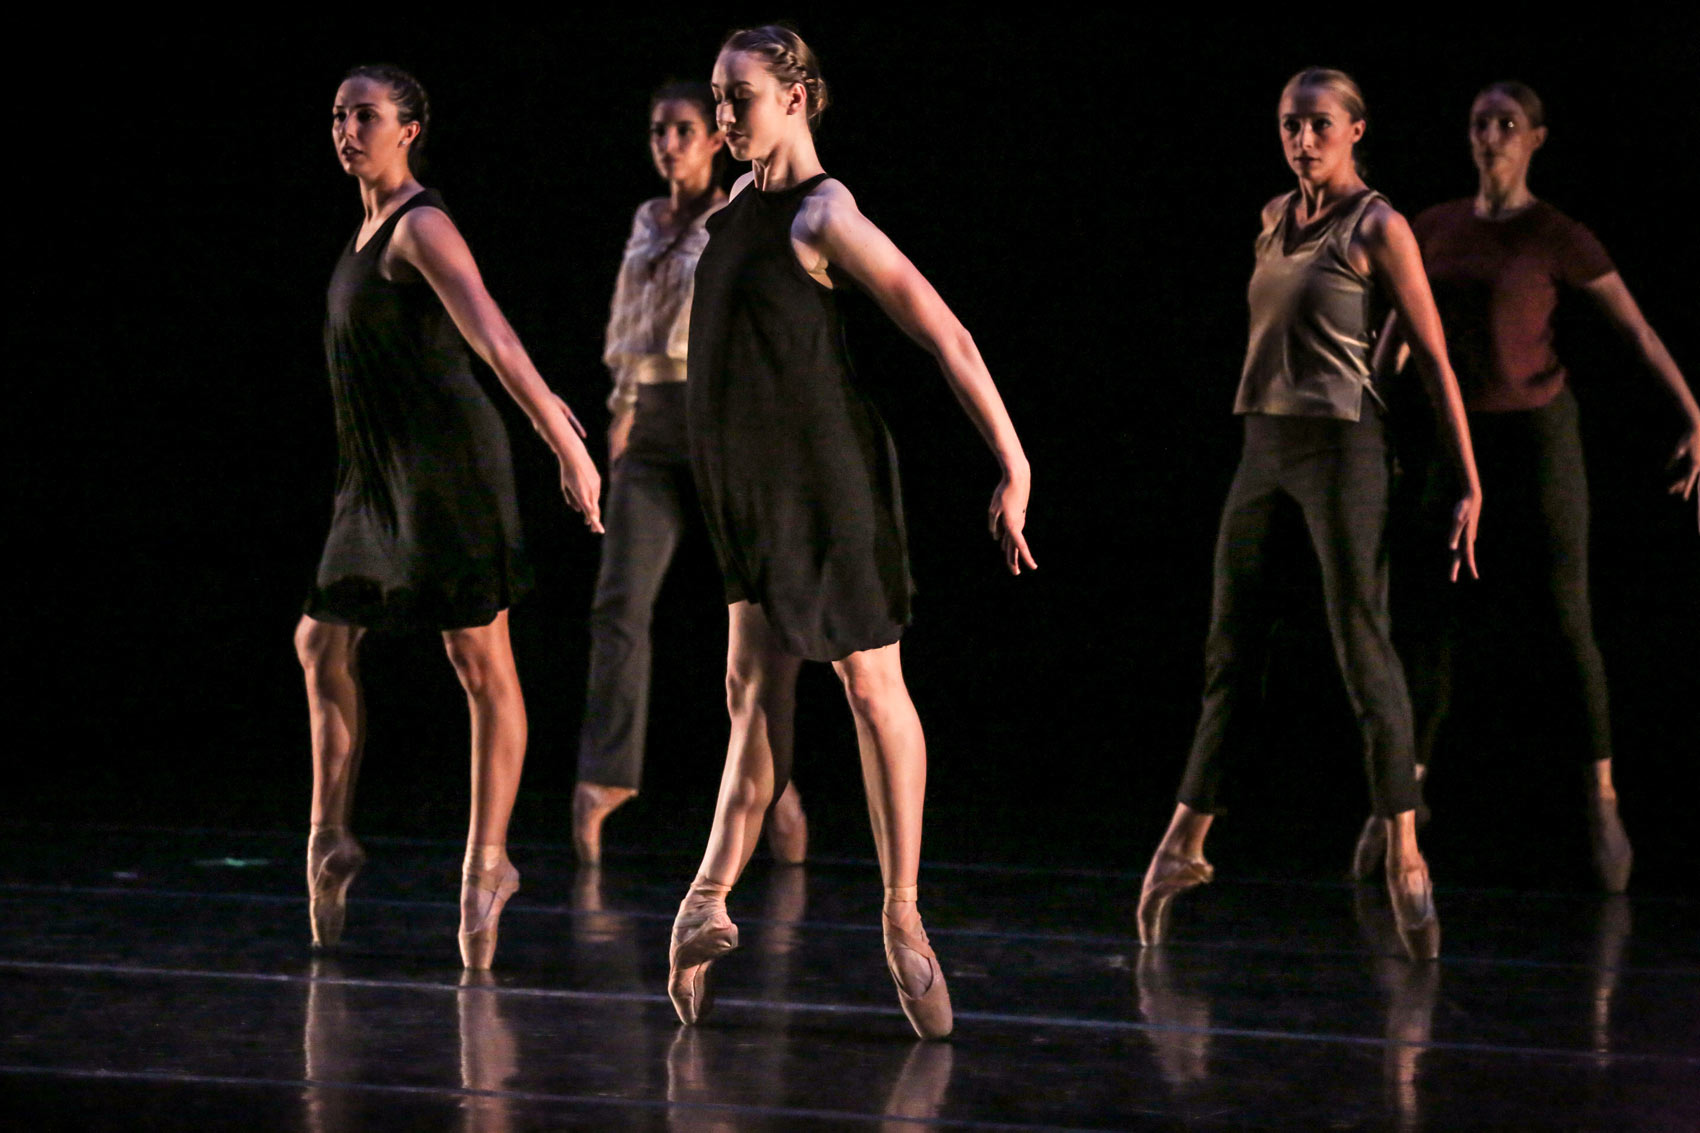 Dancers stand together on pointe.